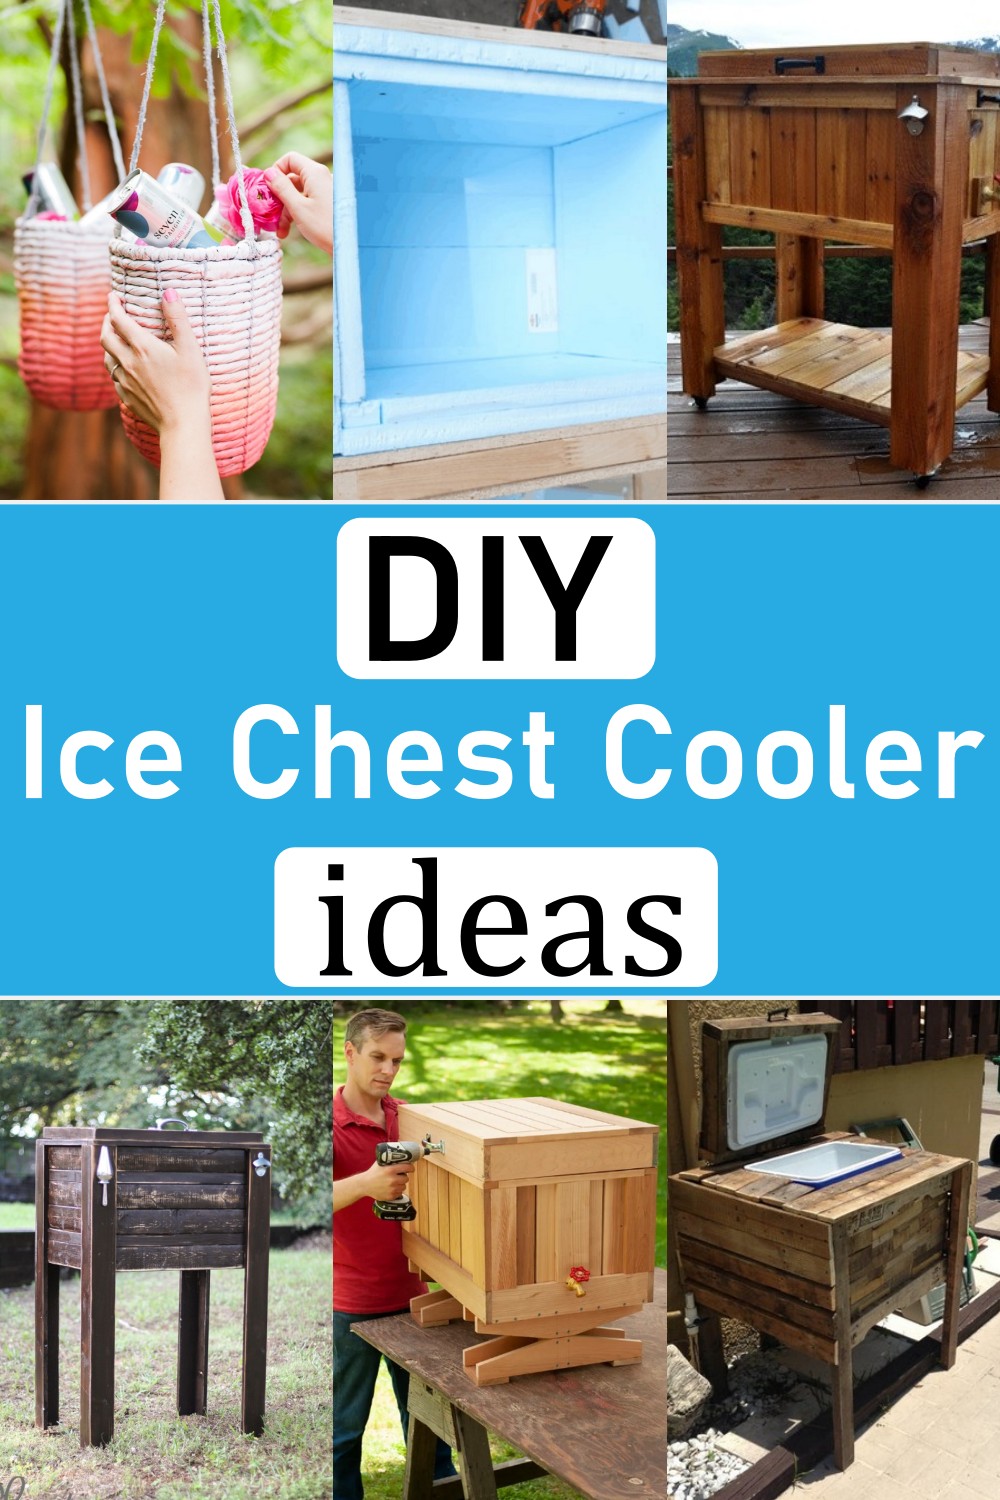  Ice Chest Cooler